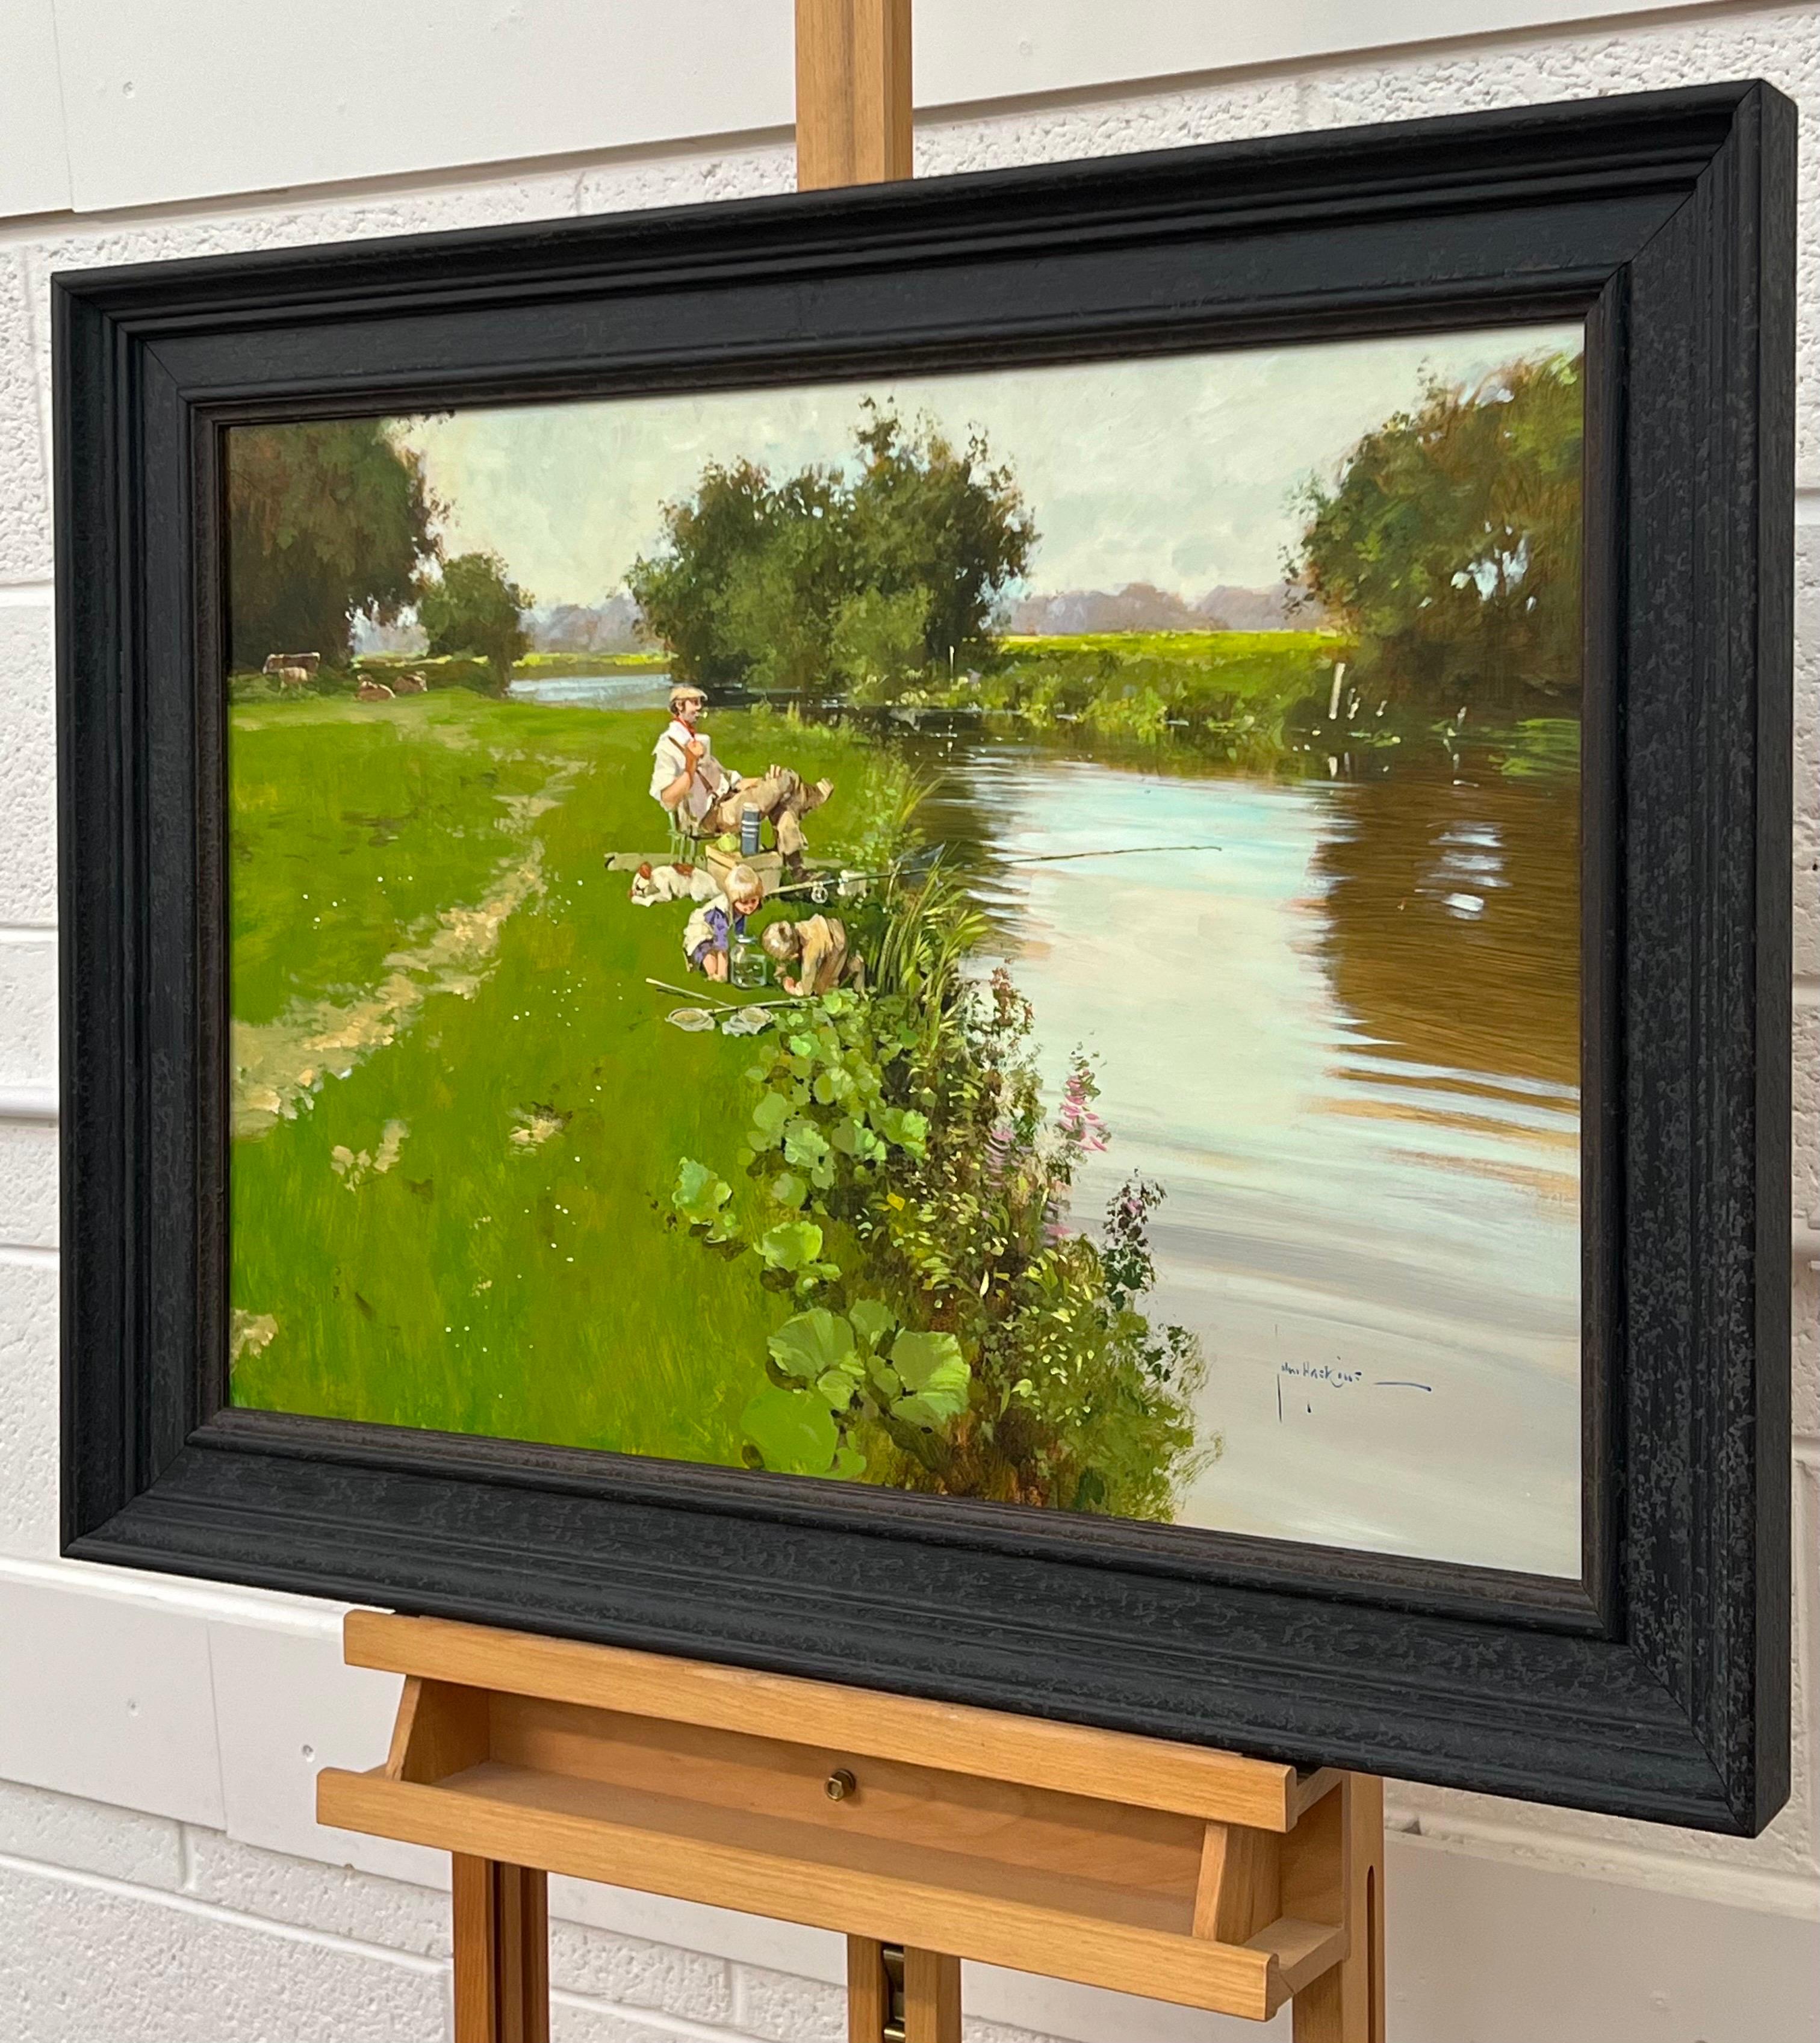 Man Fishing with Children Playing at a River Side in the English Countryside by 20th Century British Artist 

Art measures 28 x 20 inches 
Frame measures 33 x 25 inches 
Reframed in the highest quality black wooden moulding 

John Haskins is a